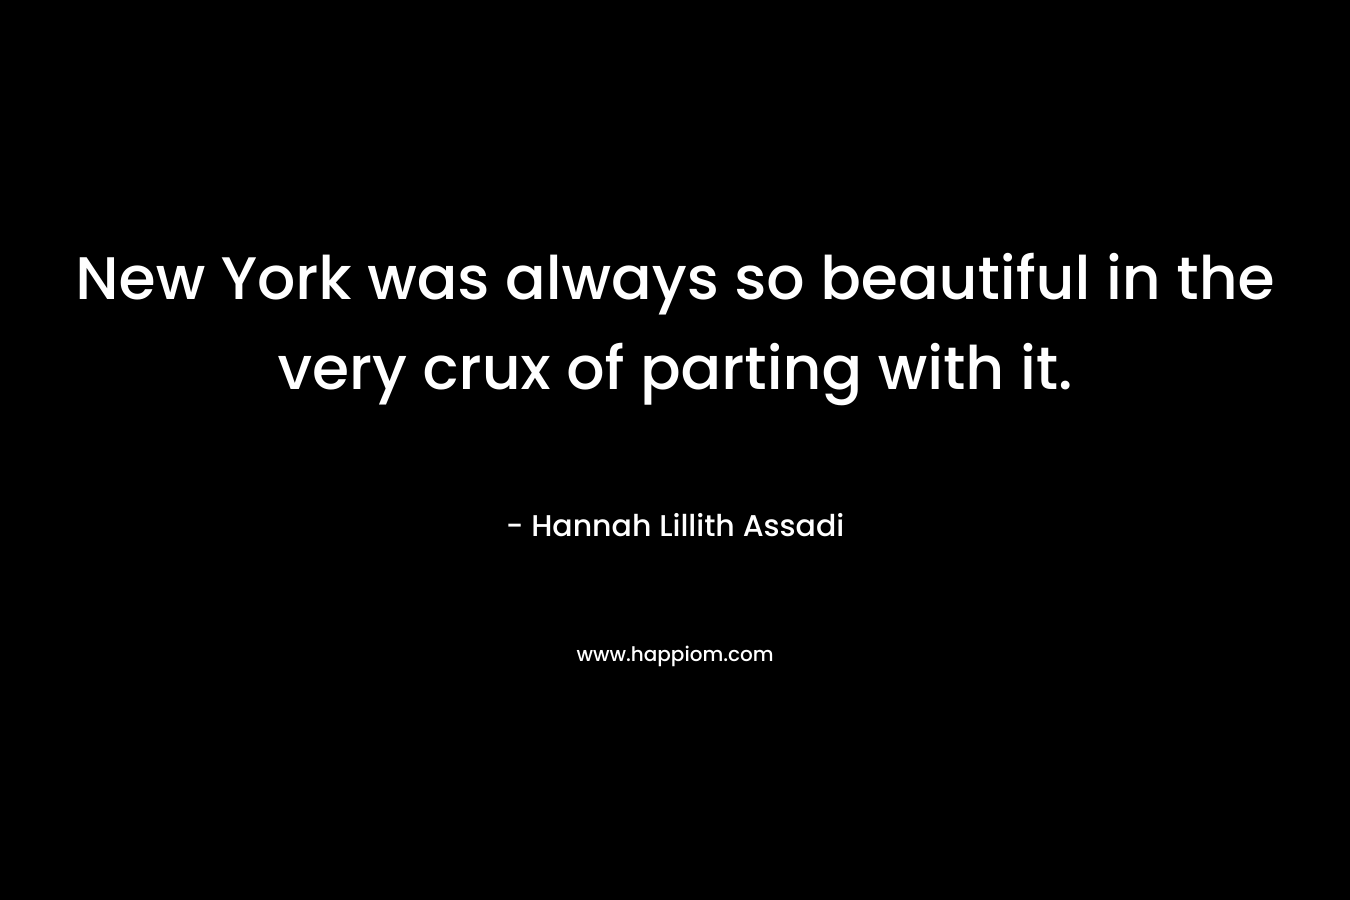 New York was always so beautiful in the very crux of parting with it. – Hannah Lillith Assadi